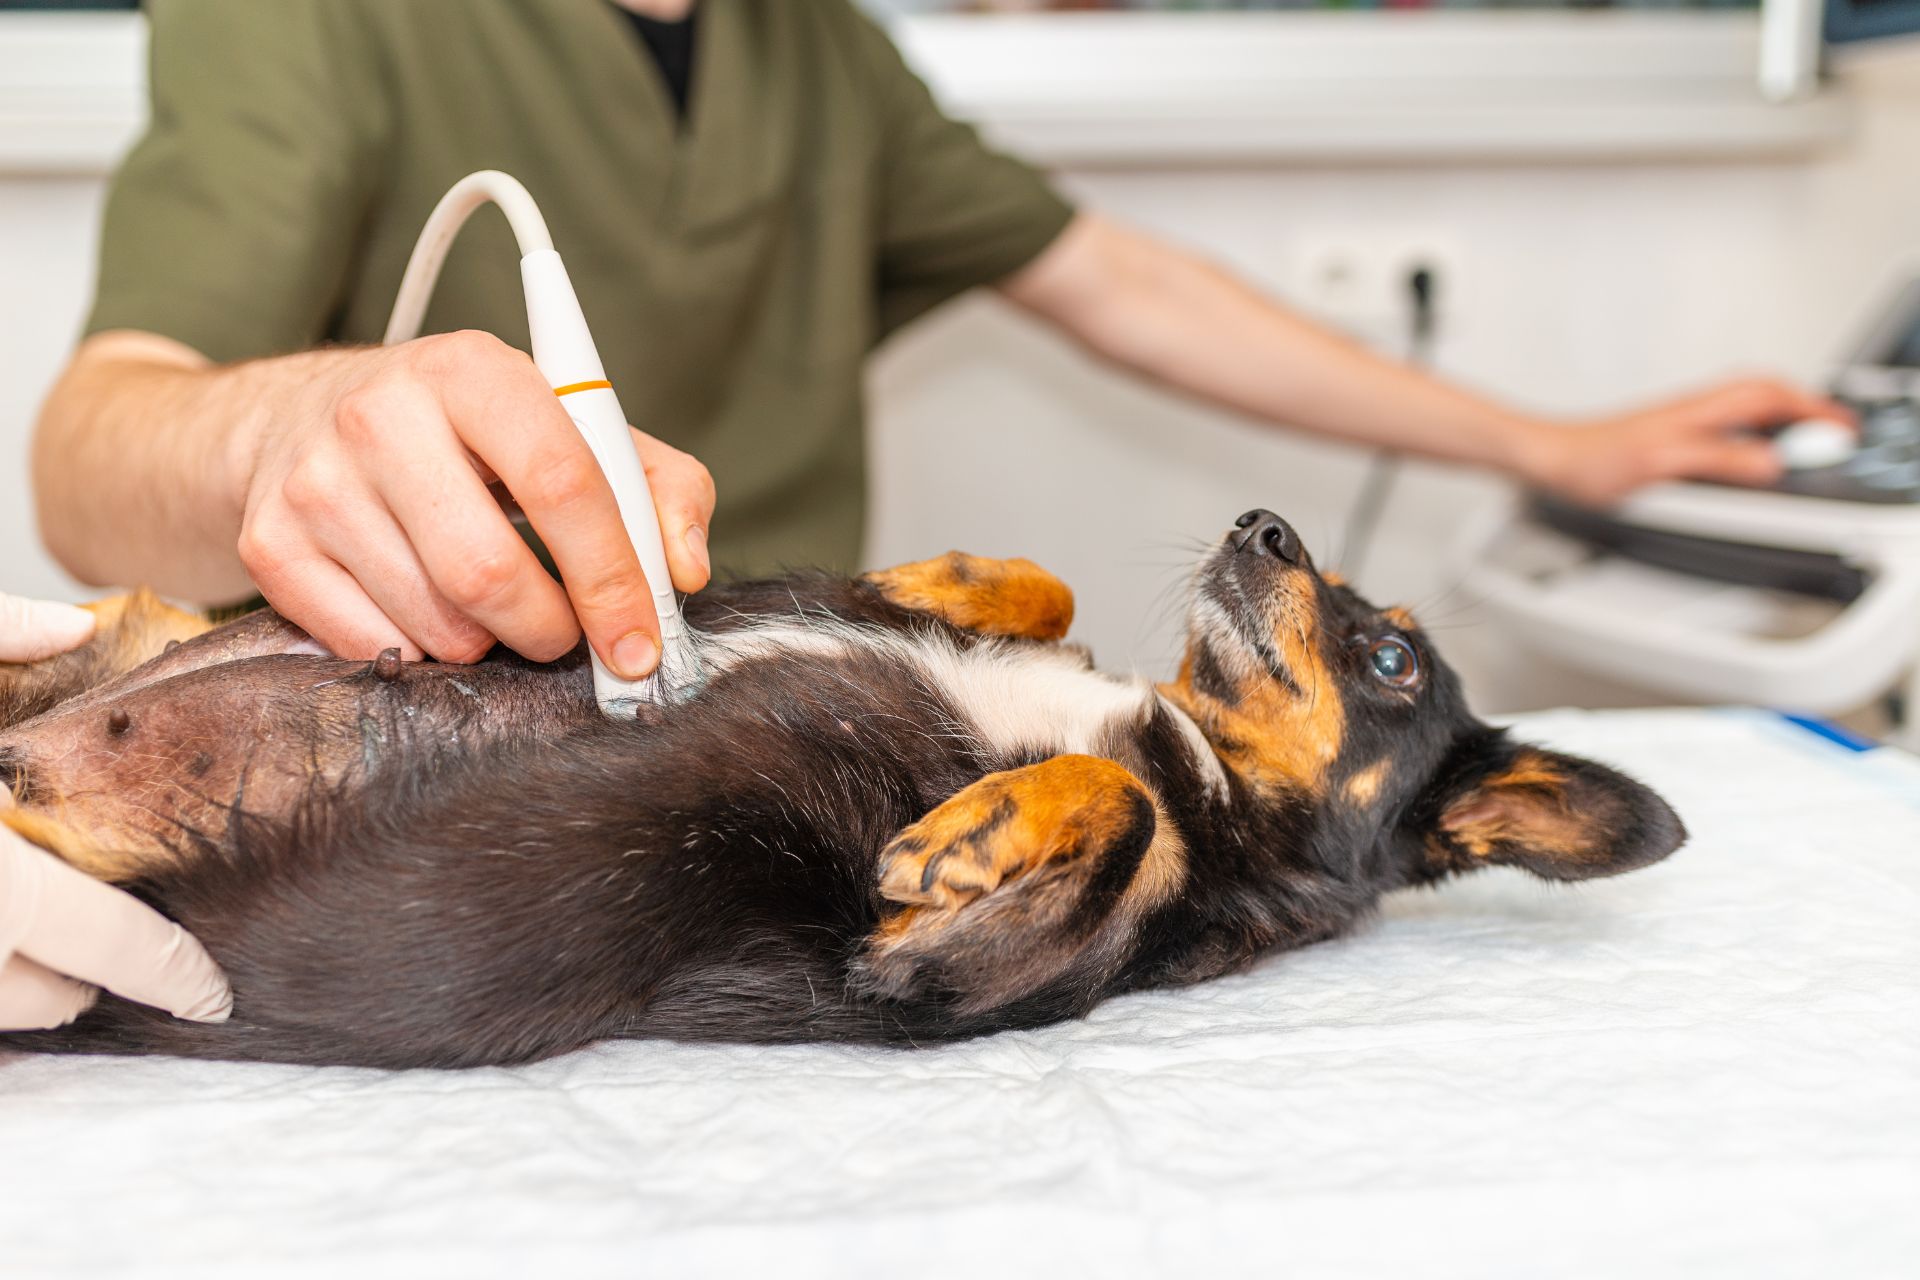 dog being examined by a vet